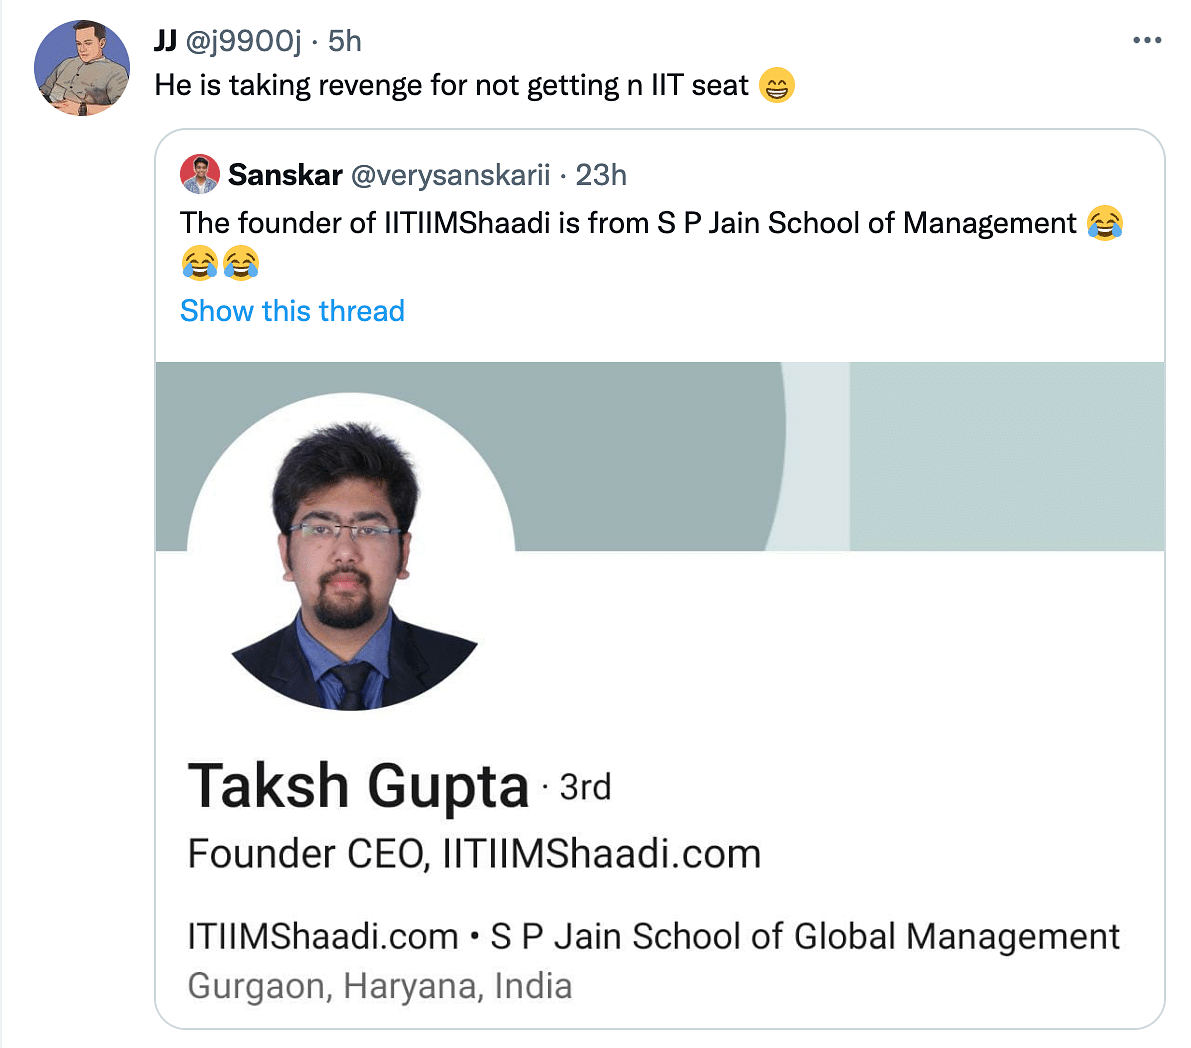 Taksh Gupta is from SP Jain School of Global Management, and Twitter says the irony is real.